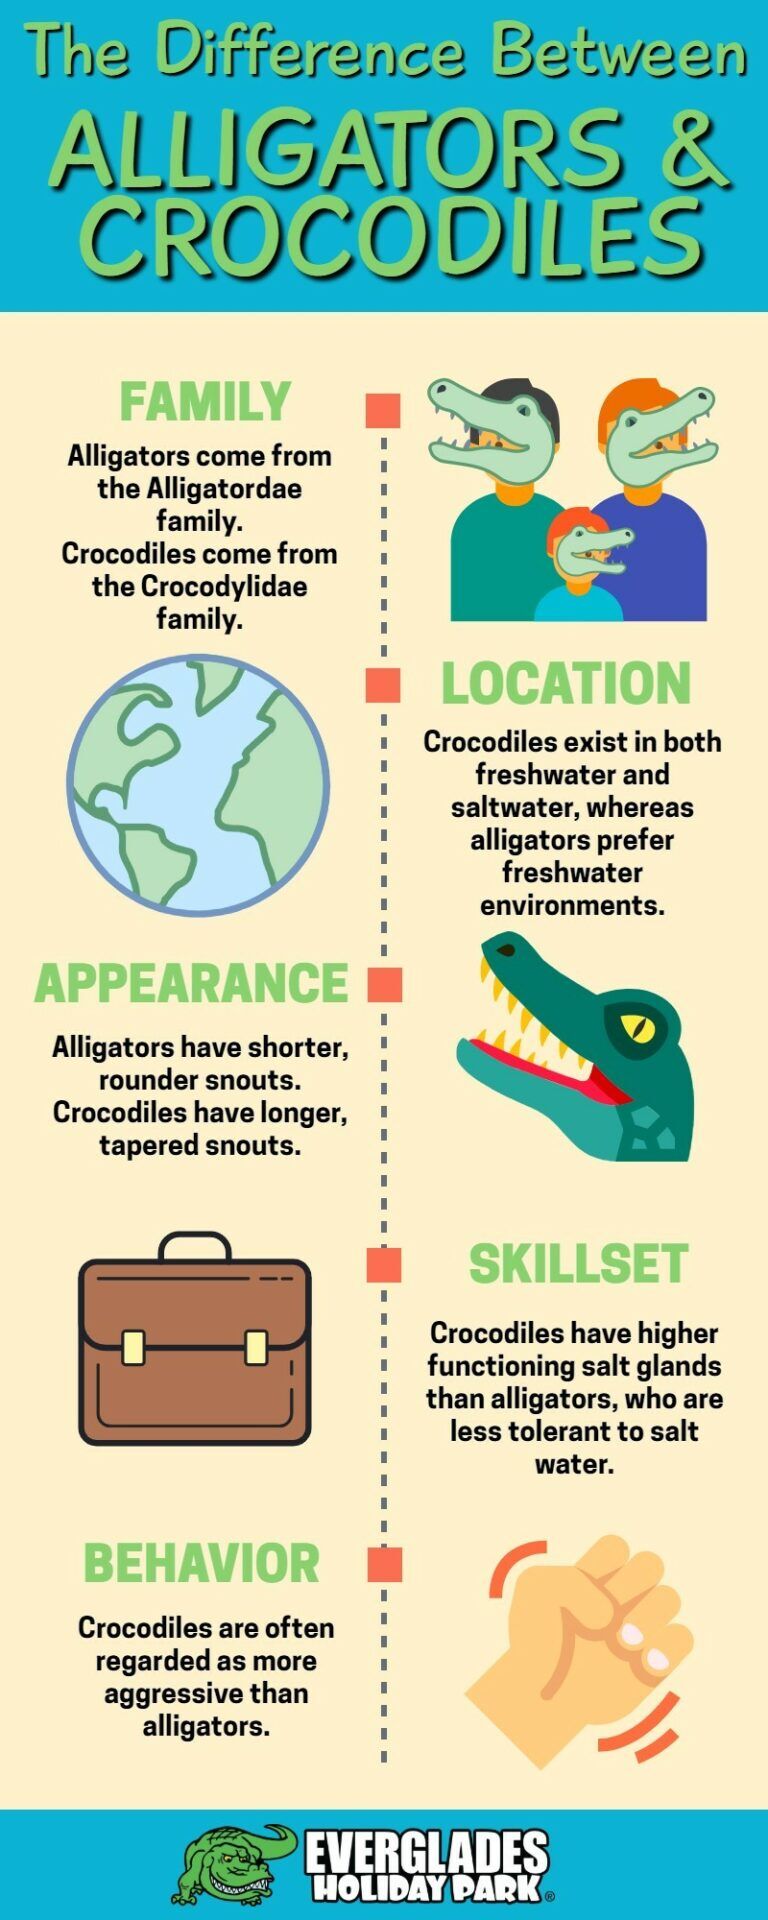 Difference between alligators and crocodiles - Infographic